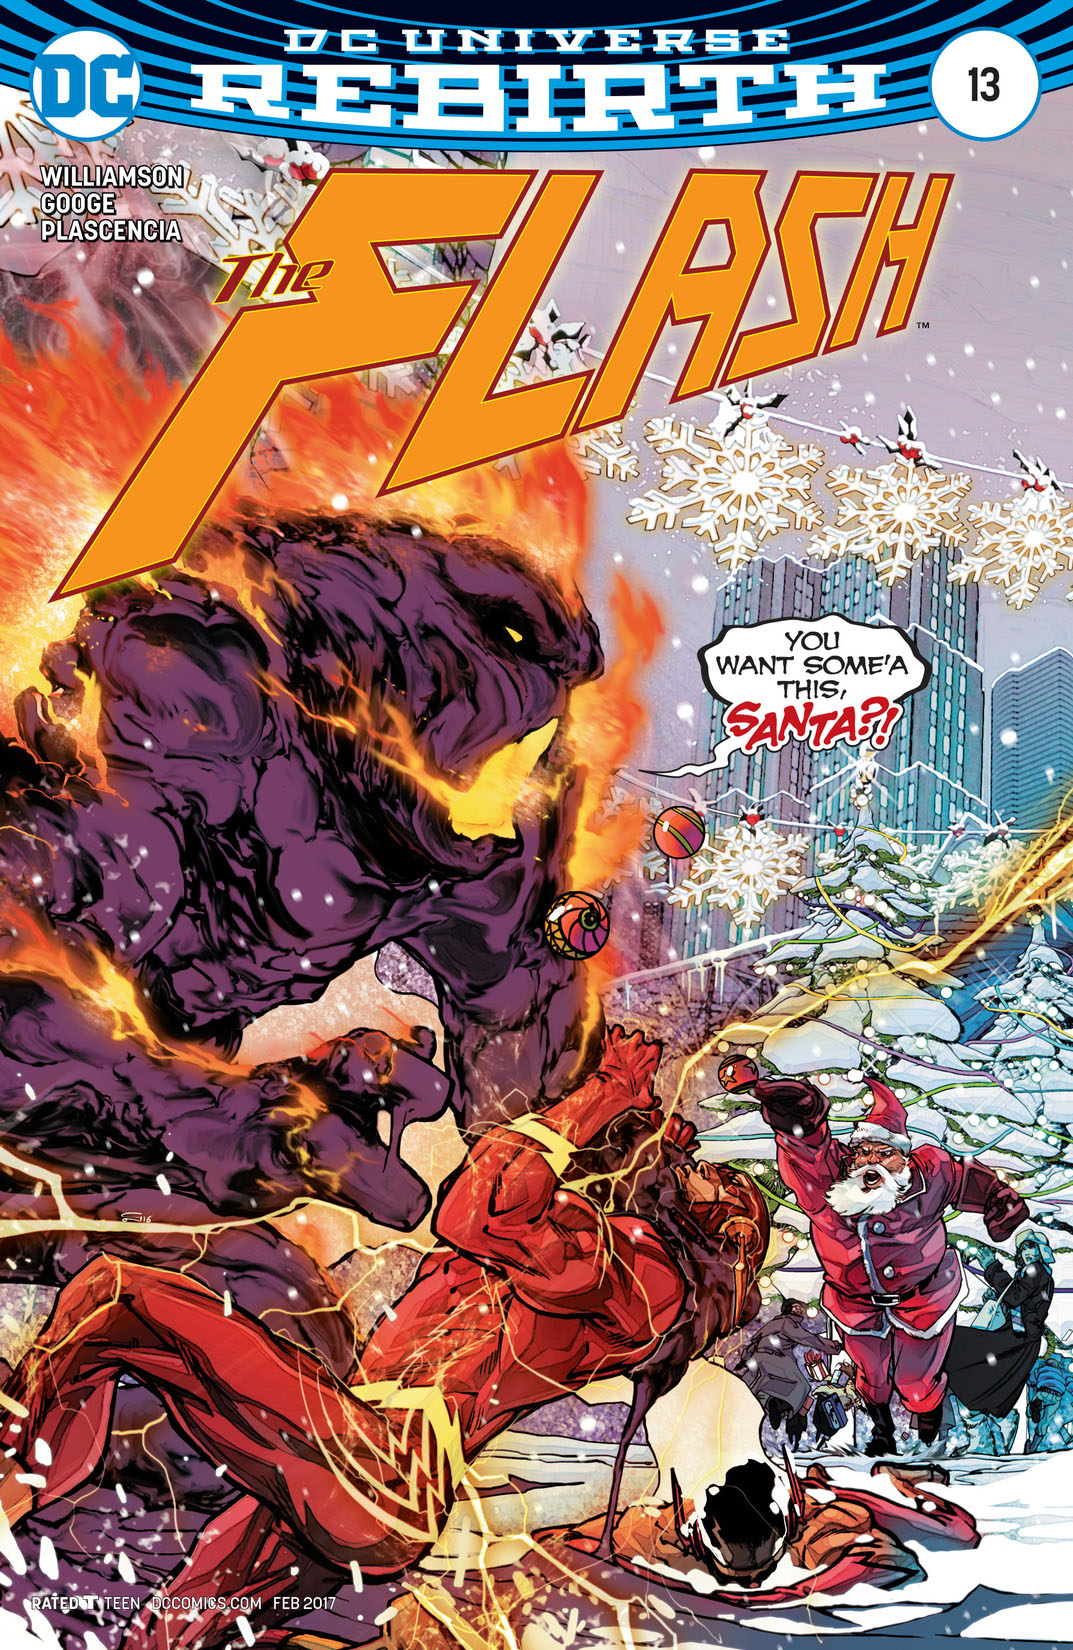 The Flash (2016-) #13 preview images